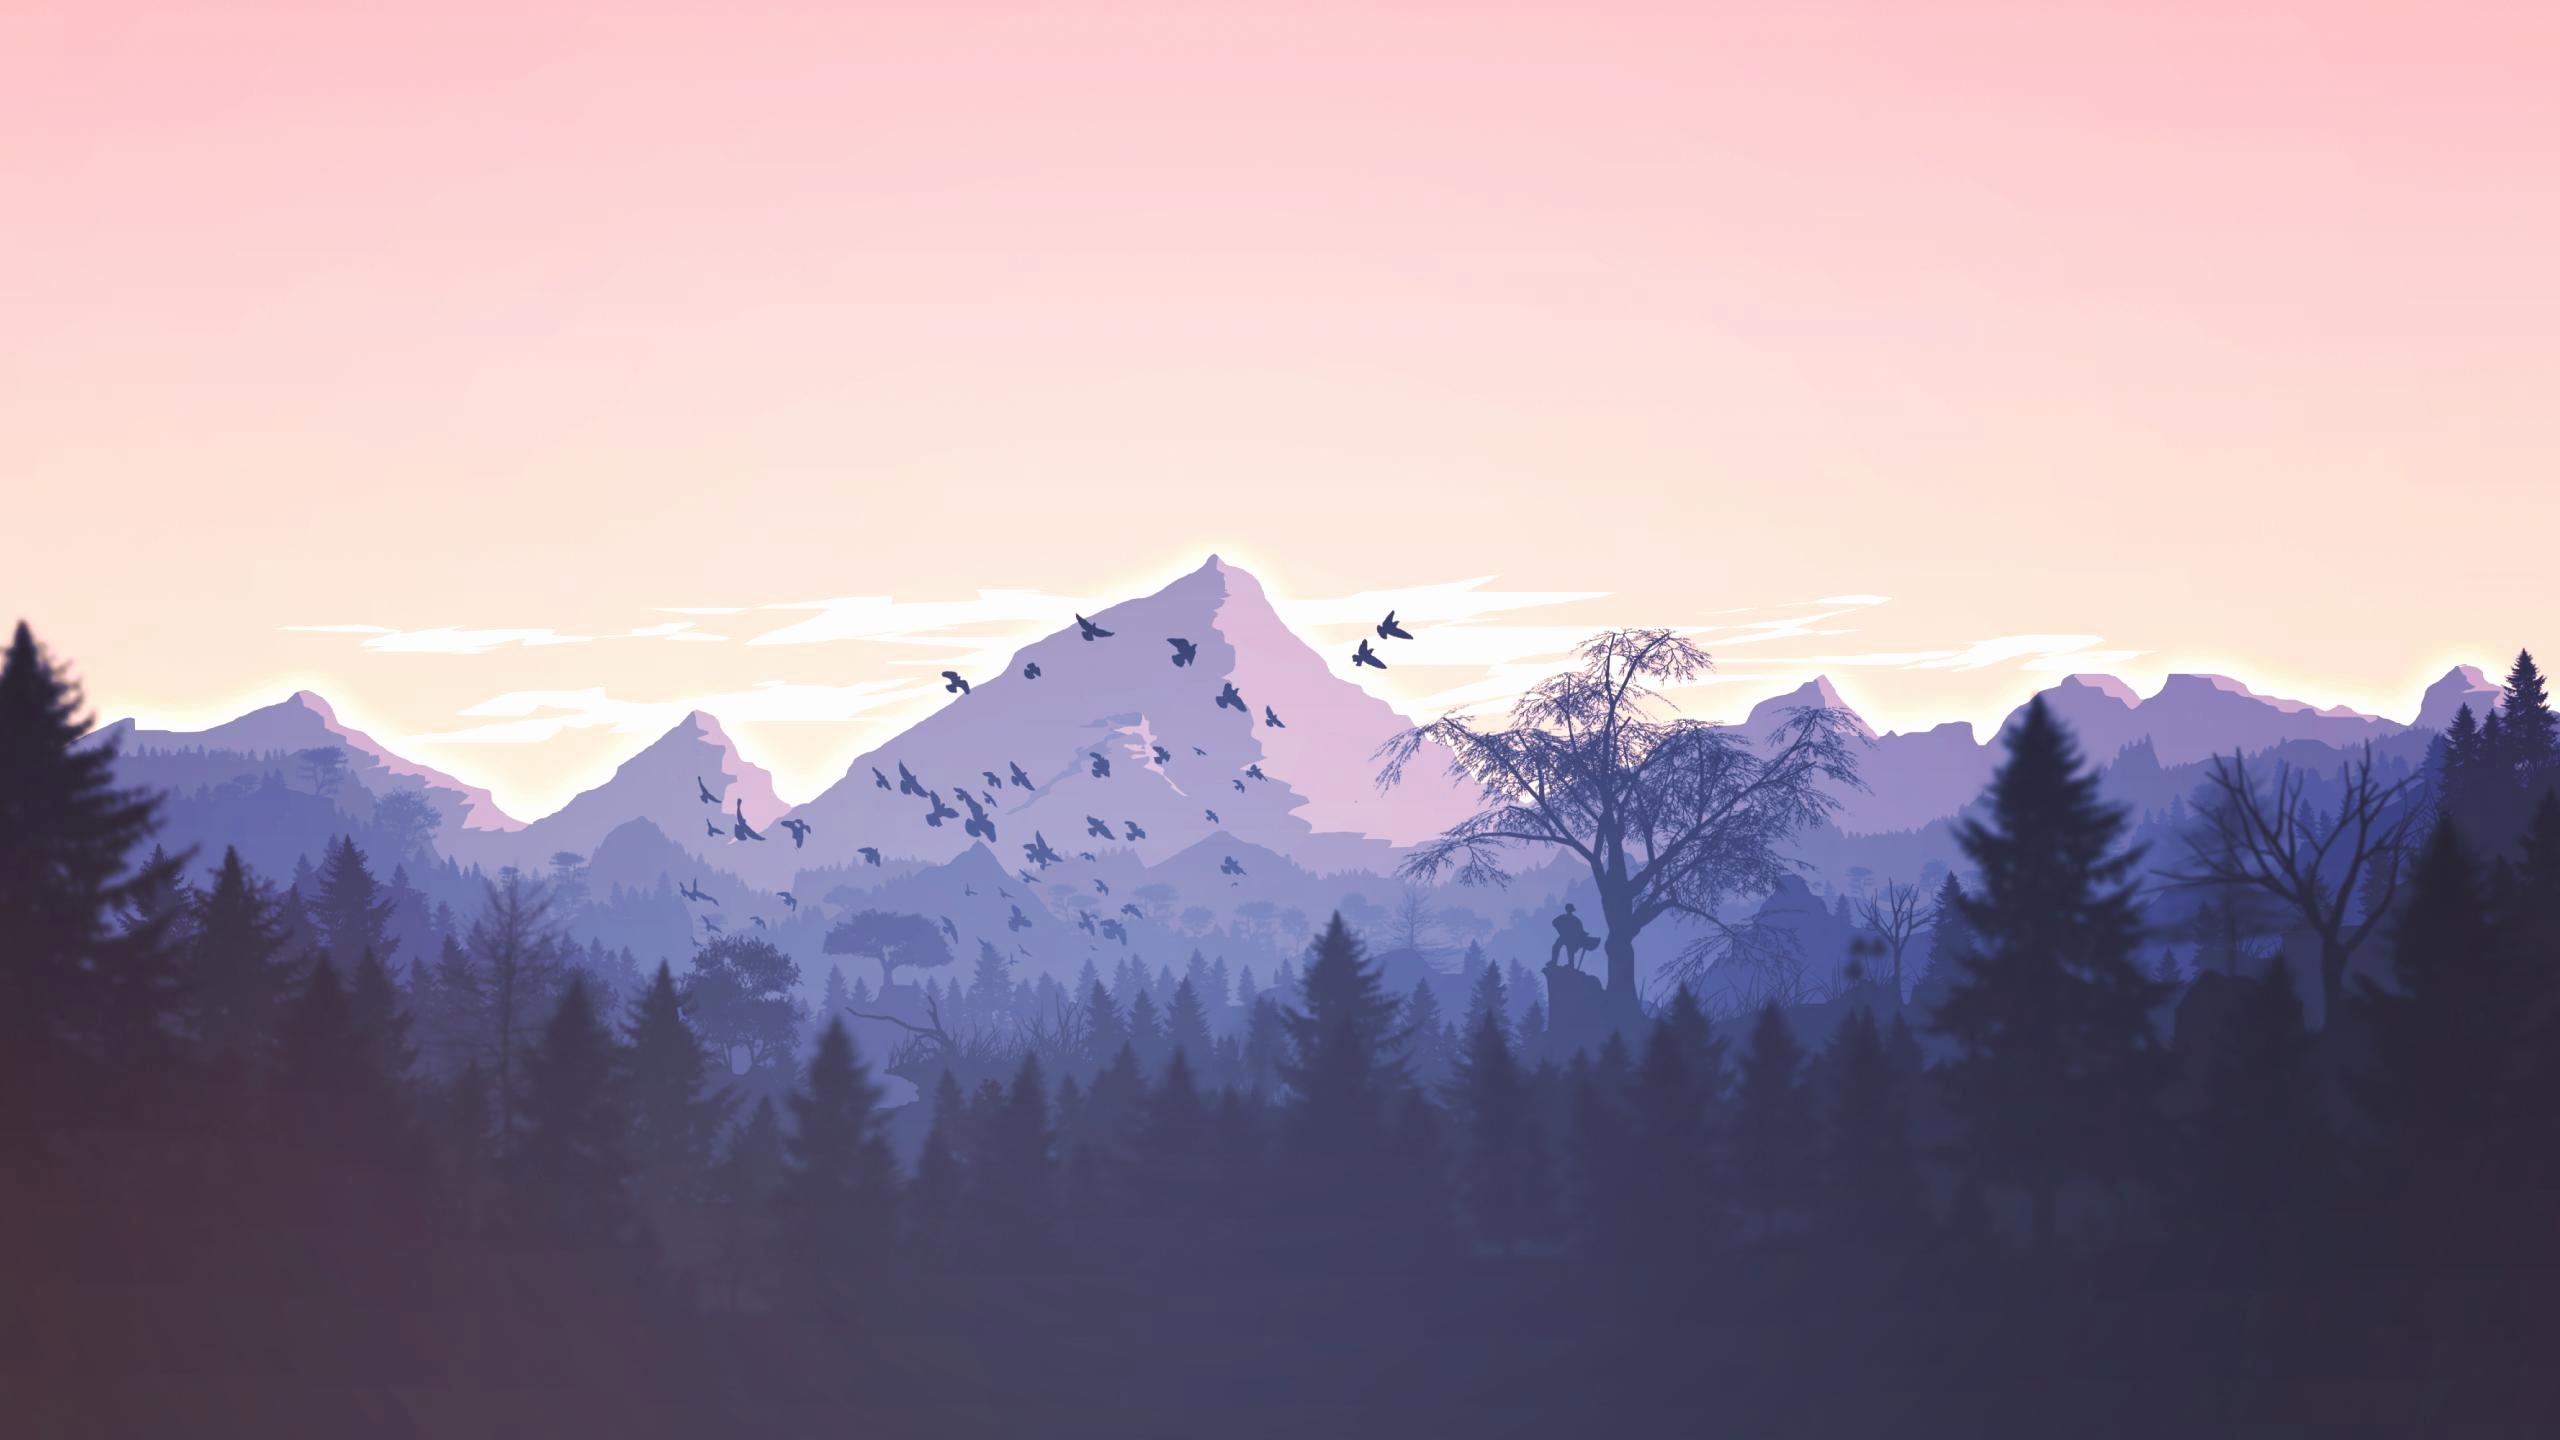 Minimalist Mountain Wallpaper HD Beautiful Landscape forest Deer Artwork Pine Trees Illustration Mountains Minimalism Animals Fire Of the Day of The Hudson